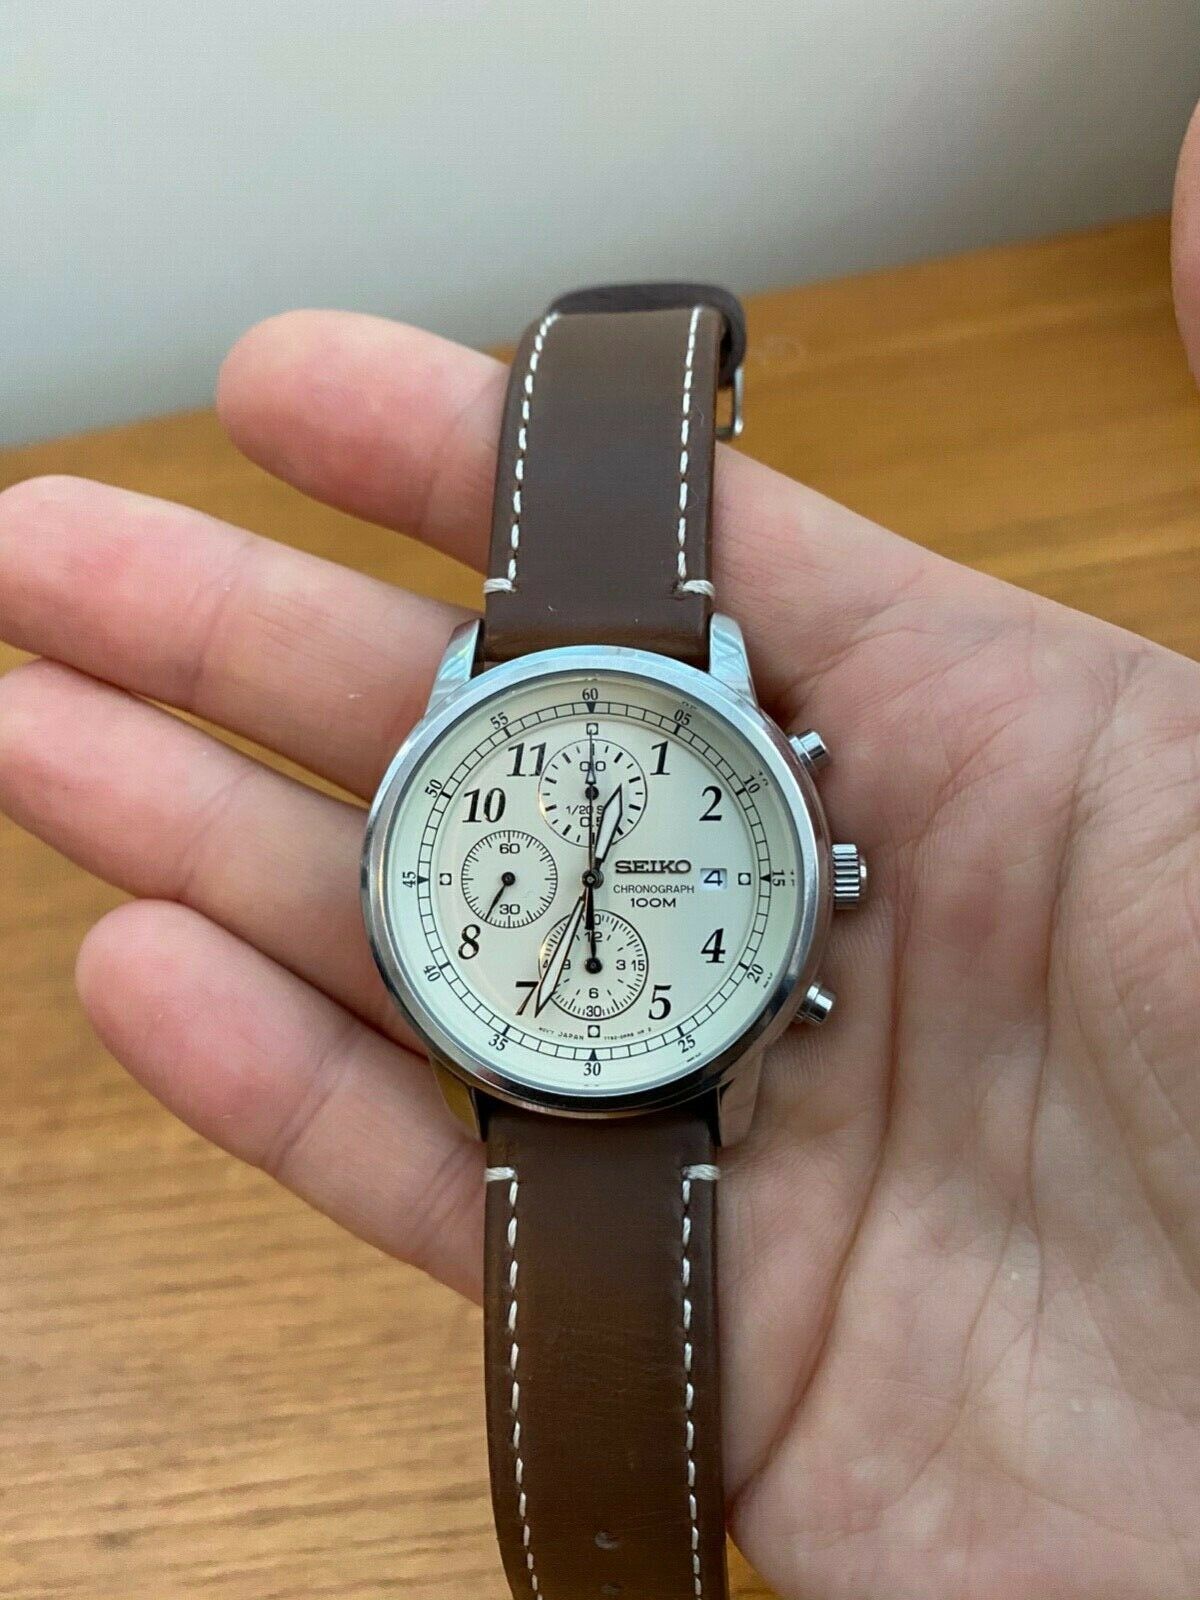 SNDC31 40mm Quartz Chronograph with brown leather strap + extras |